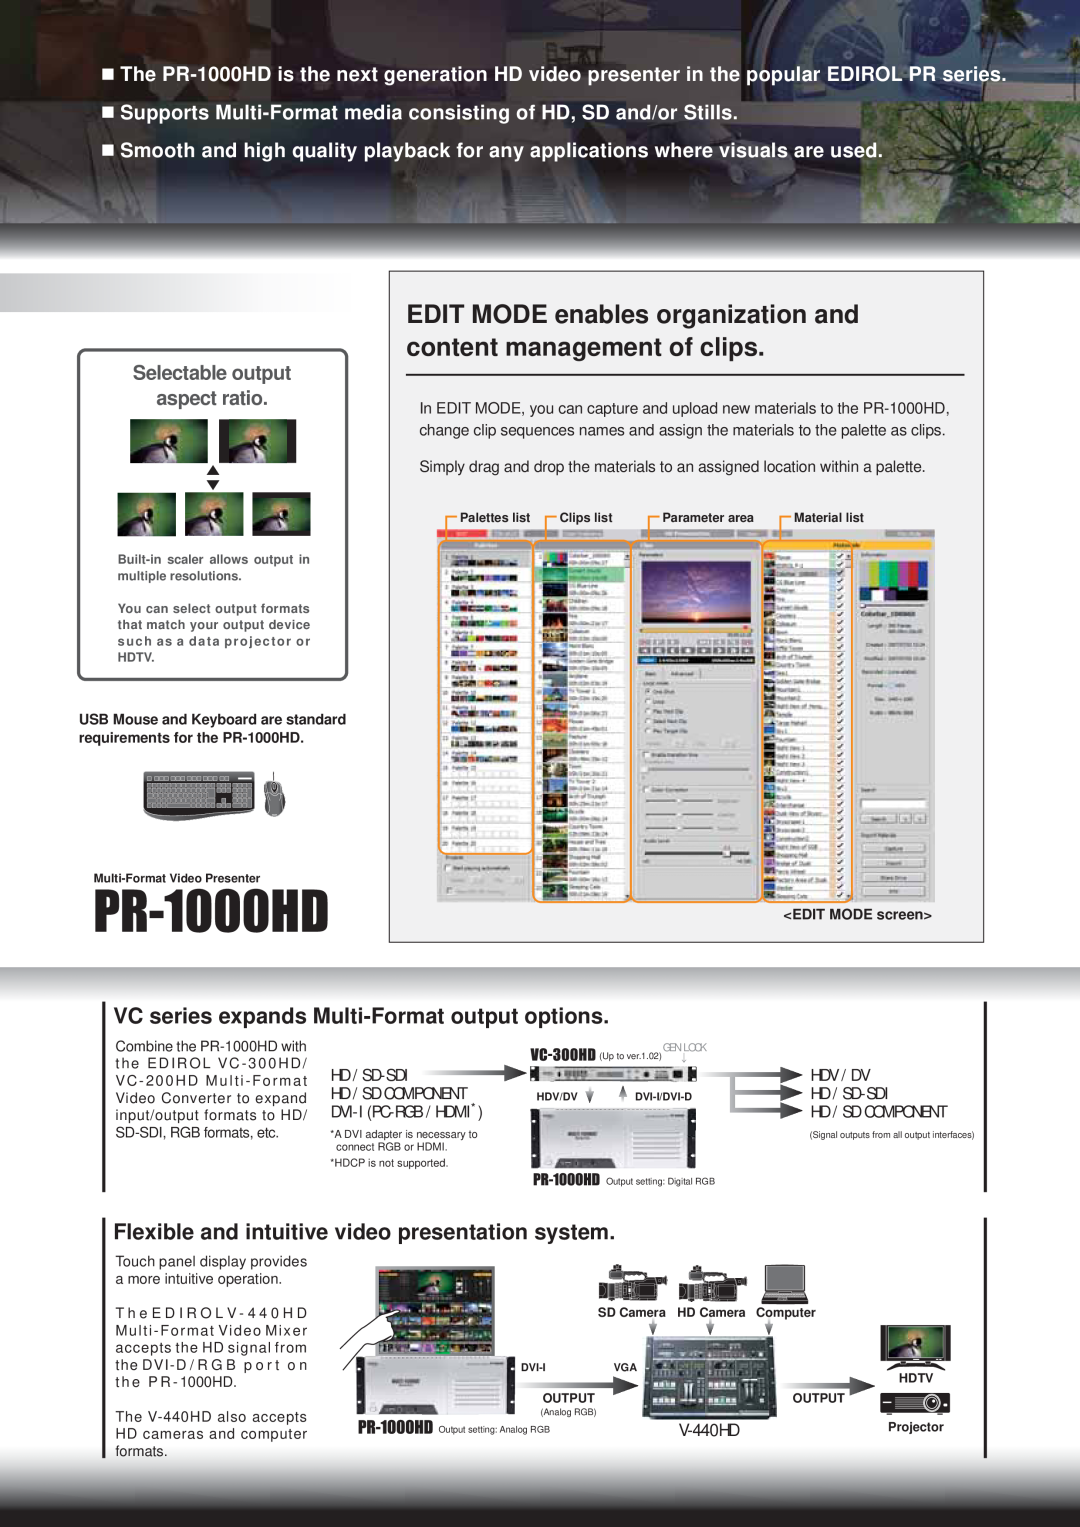 Edirol PR-1000HD manual VC series expands Multi-Format output options, Flexible and intuitive video presentation system 